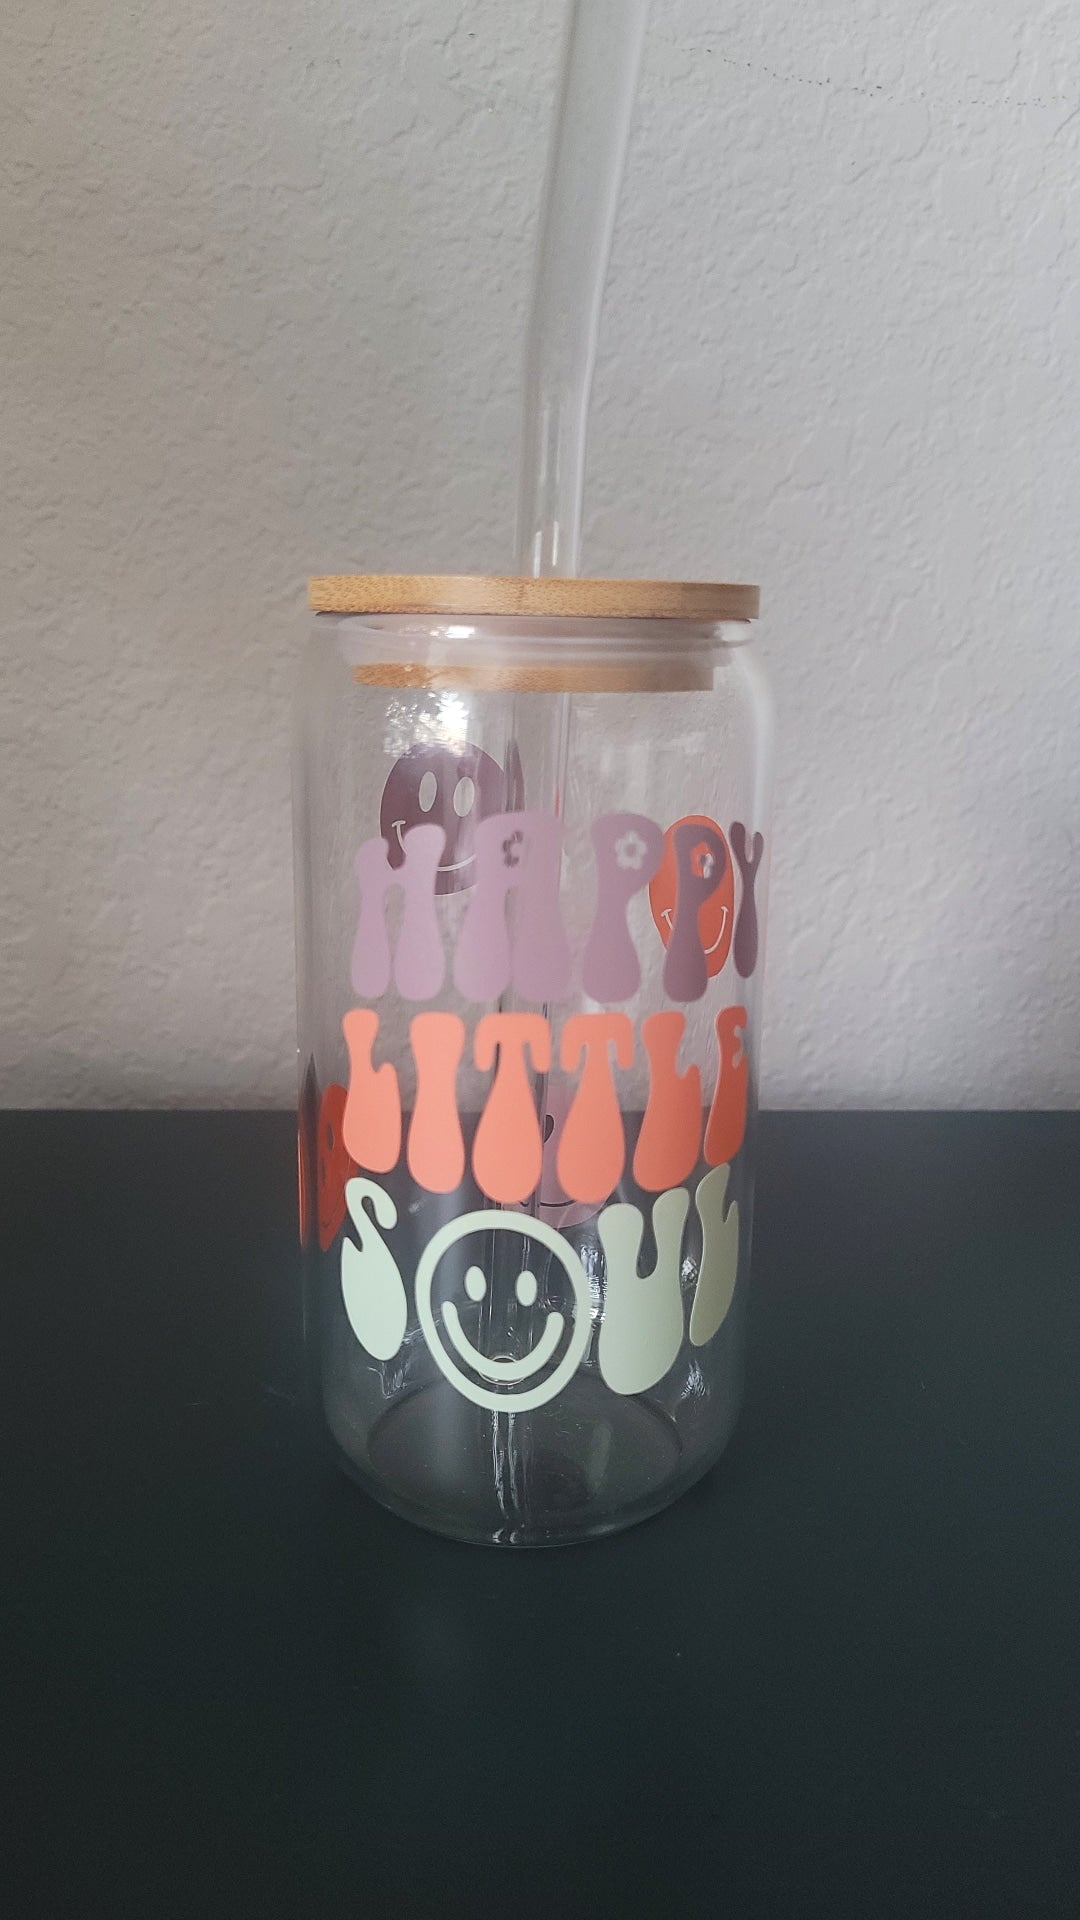 Cat Mom Glass Cup | Bamboo Lid & Straw Included